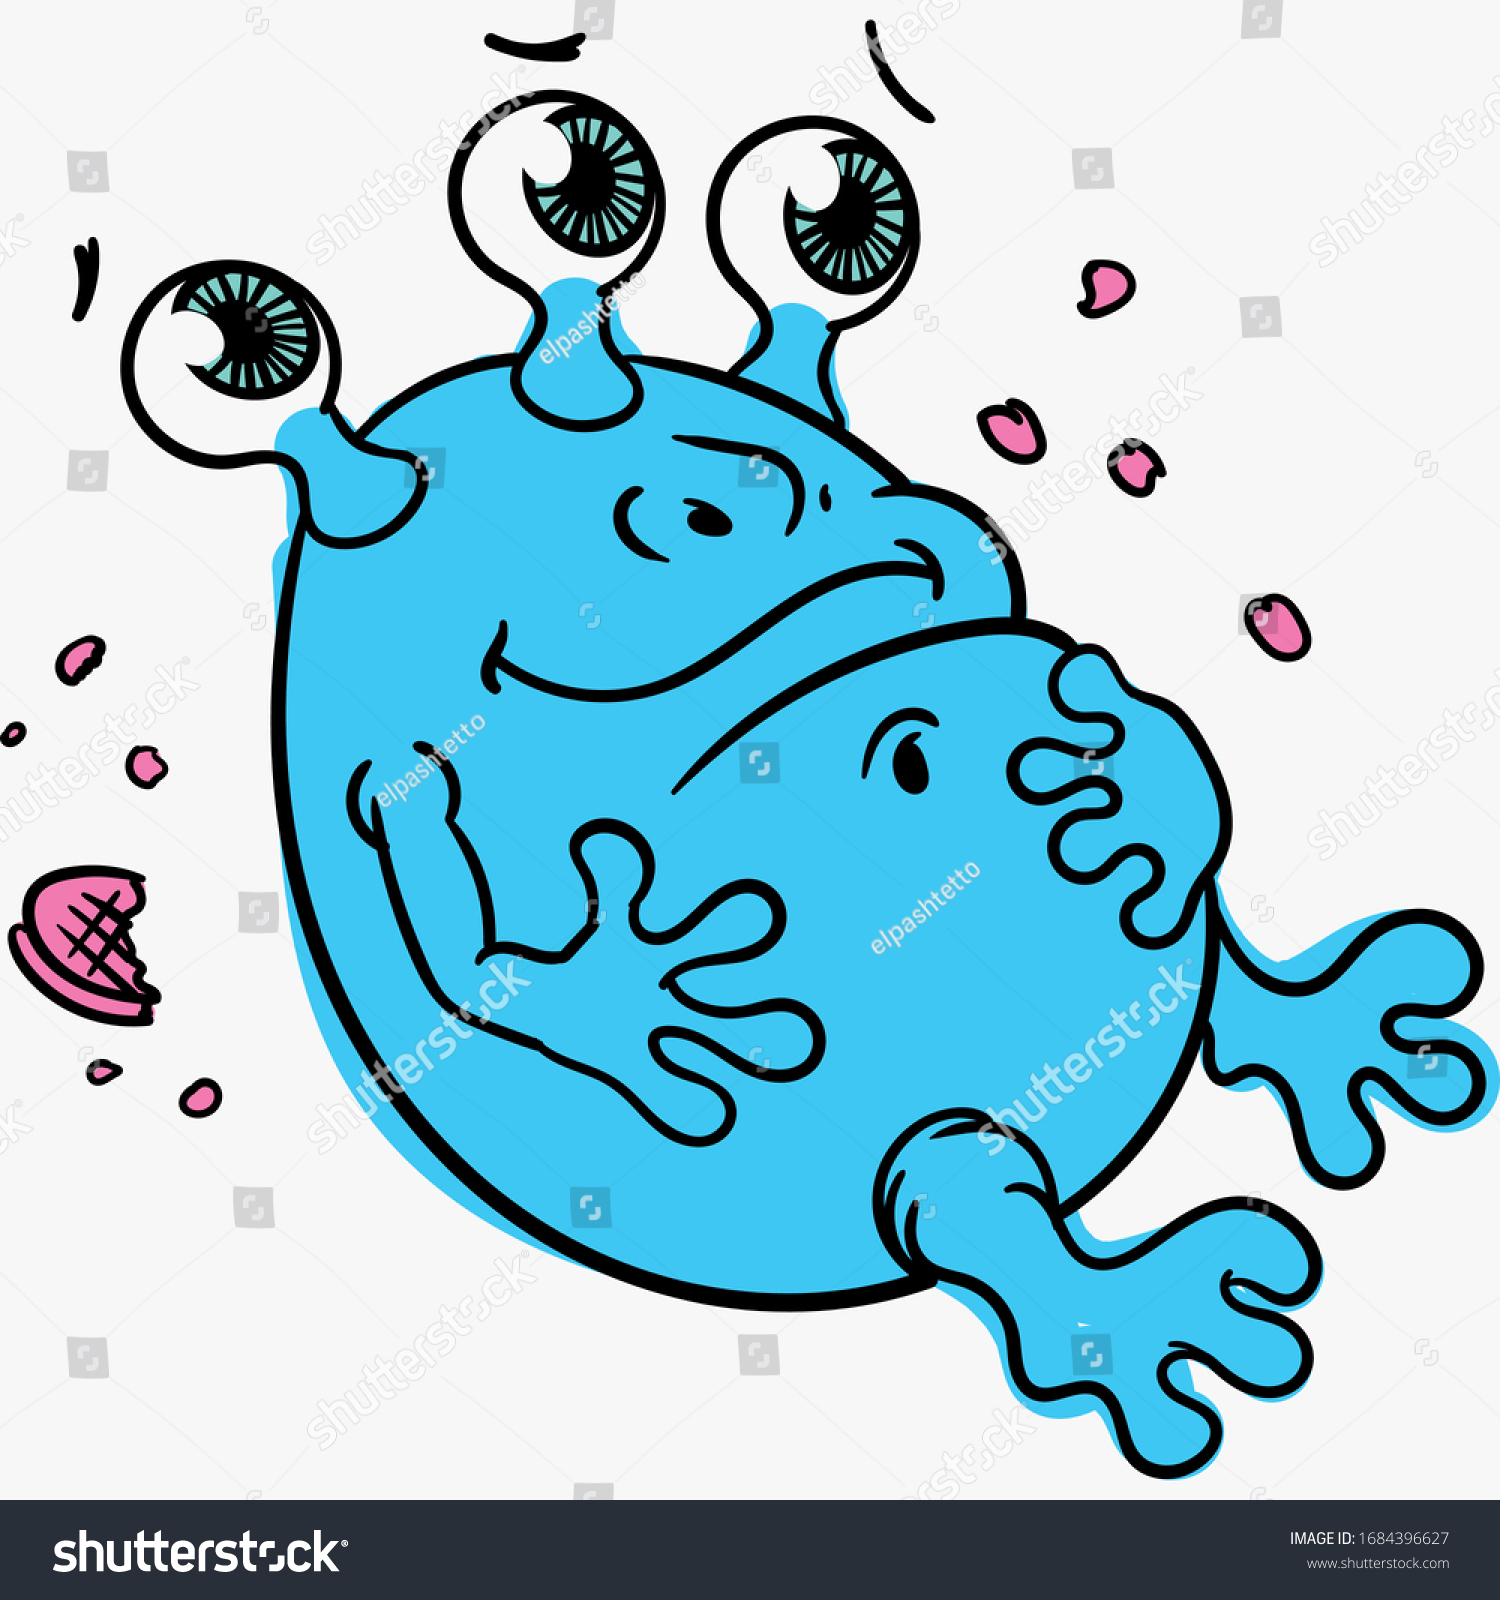 SVG of cartoon, cute three-eyed blue alien glutton, isolated on a white background, icon svg